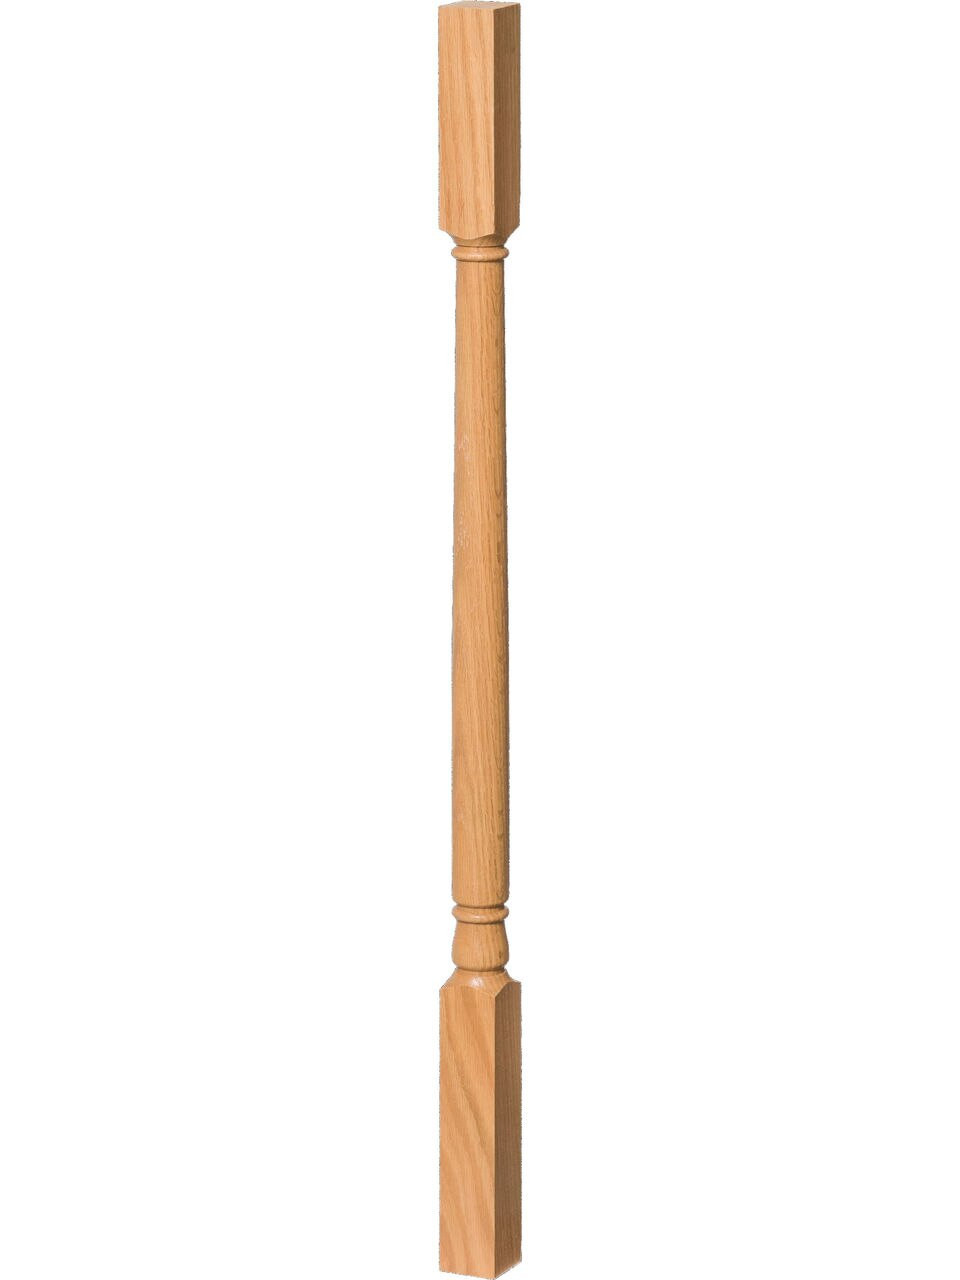 5241 42" Colonial Square Top Baluster